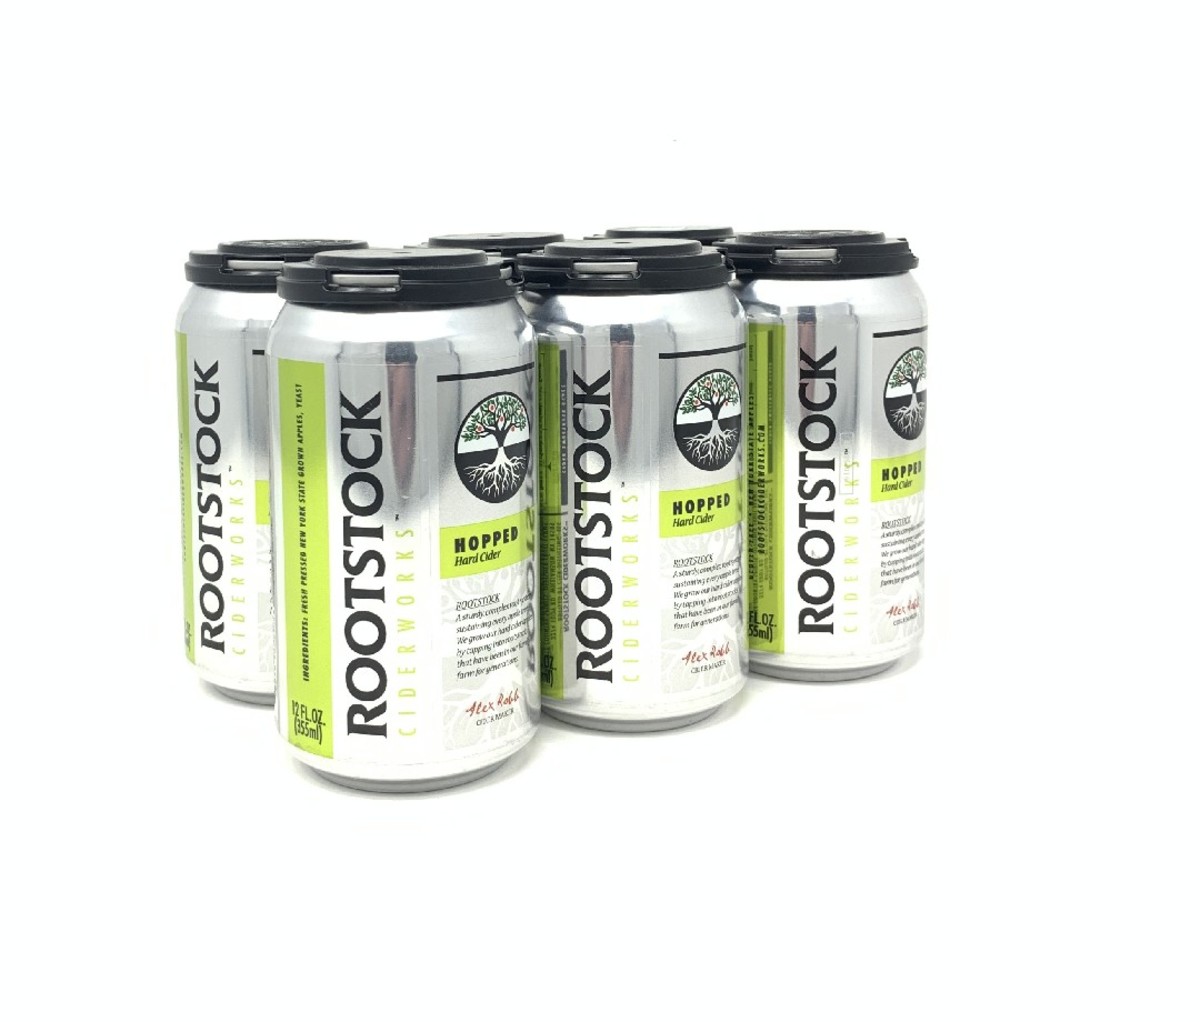 6-pack cans of Rootstock hopped cider